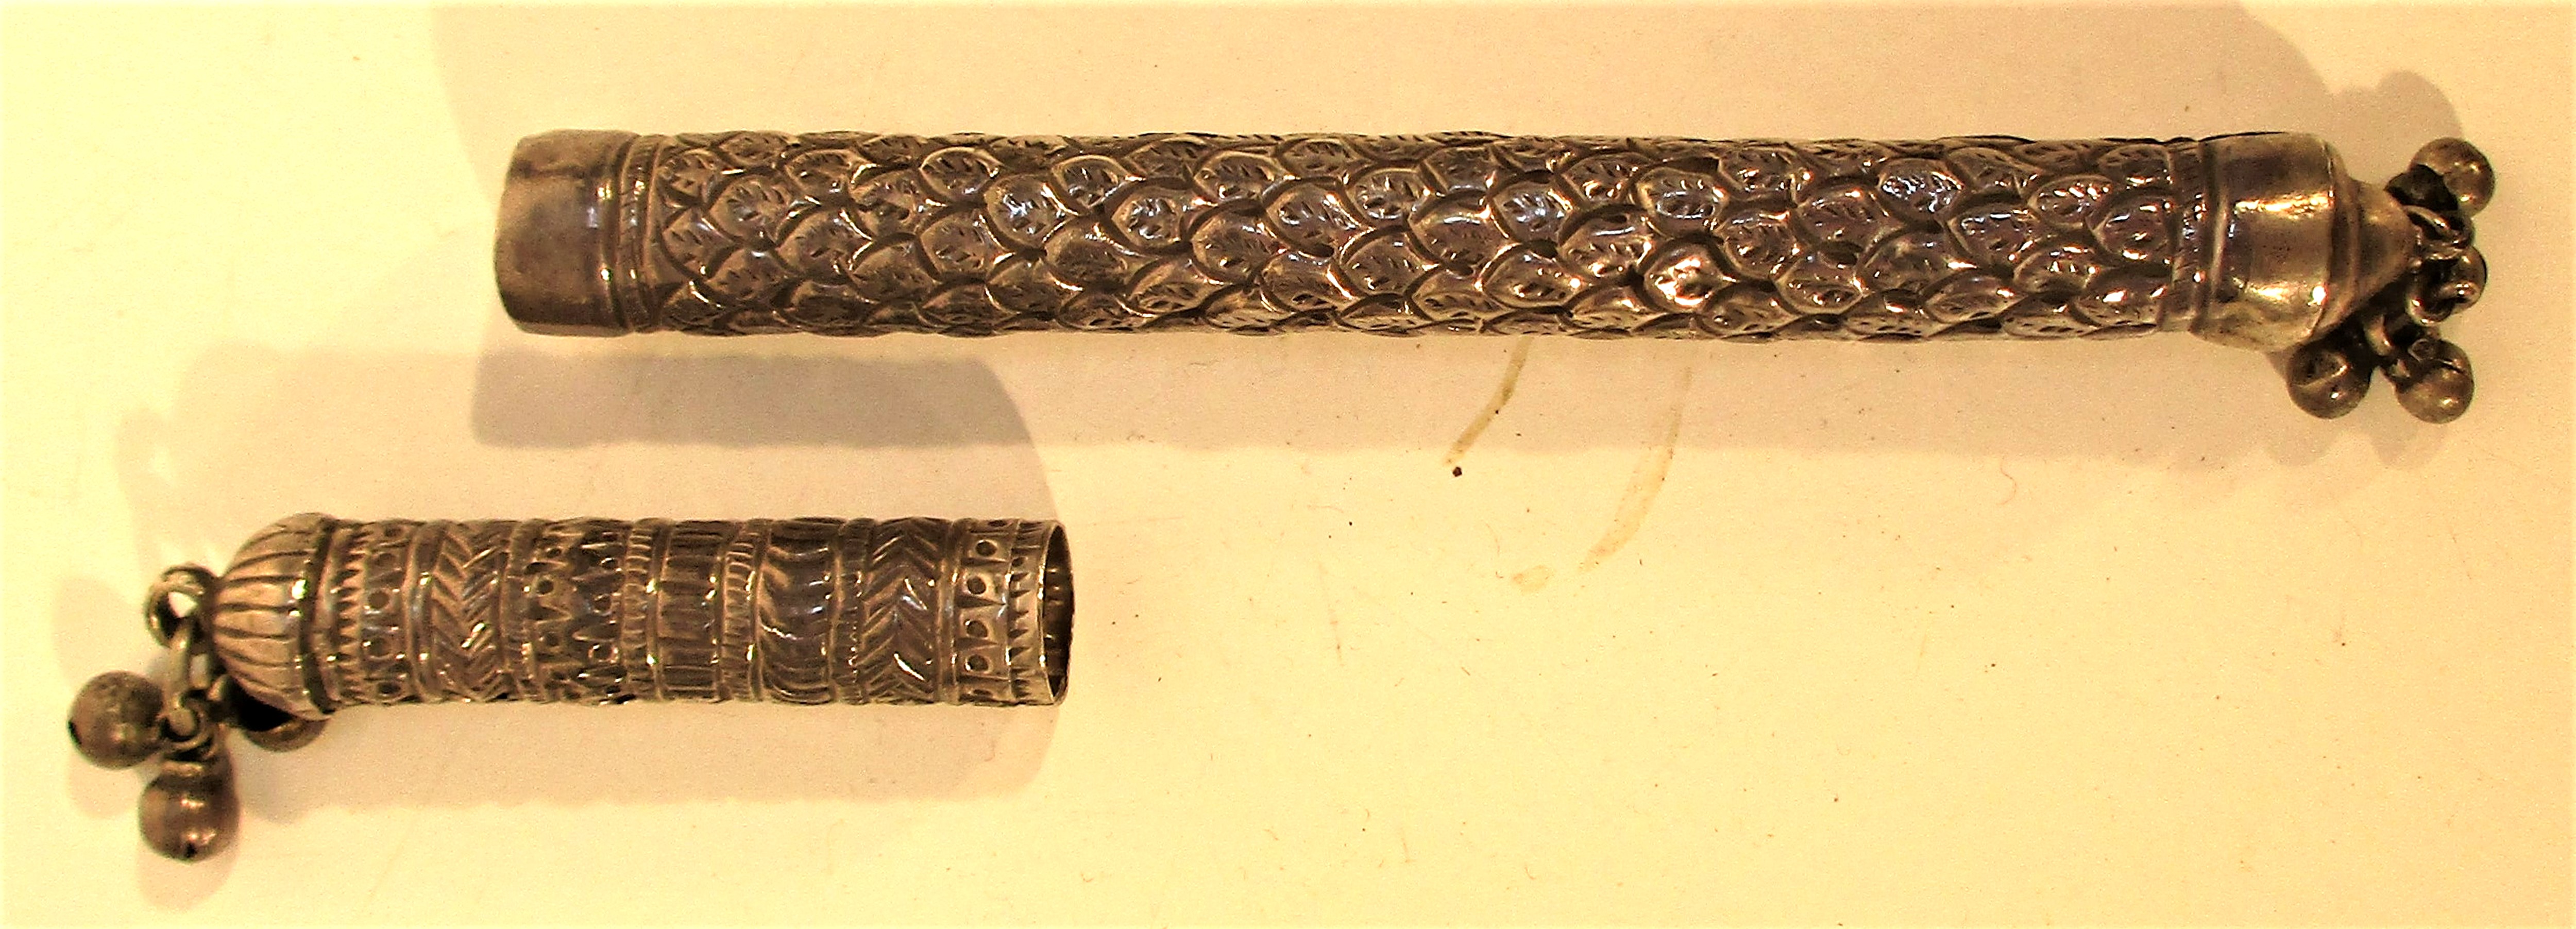 A scribes quill holder. Engraved with tiny bells on the ends. 18cm. long - Image 2 of 2